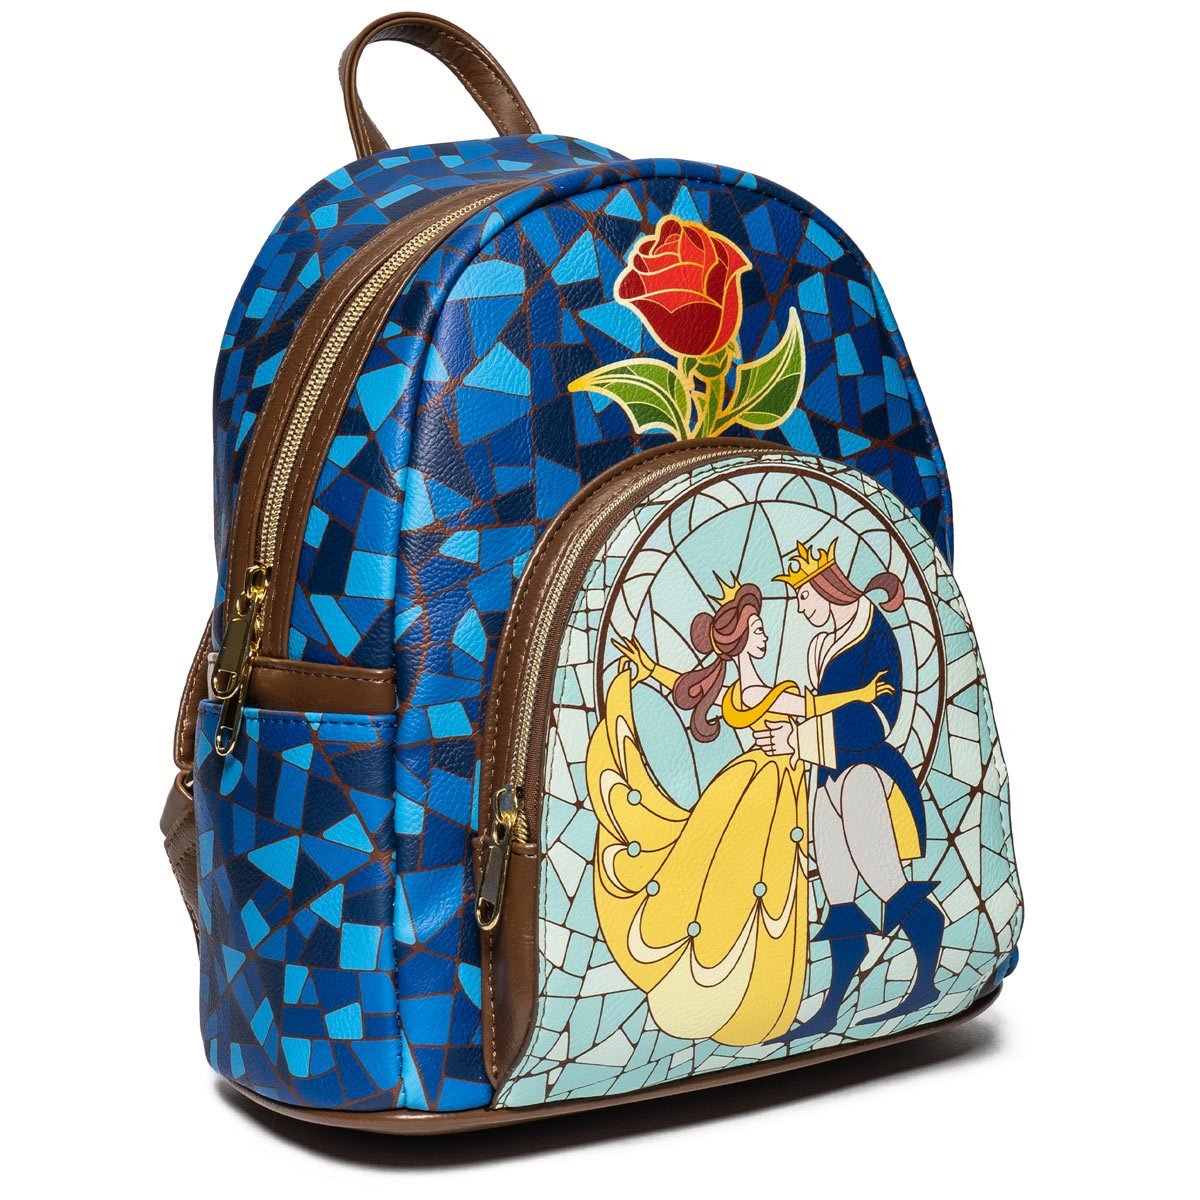 Beauty and the Beast stained-glass window mini backpack